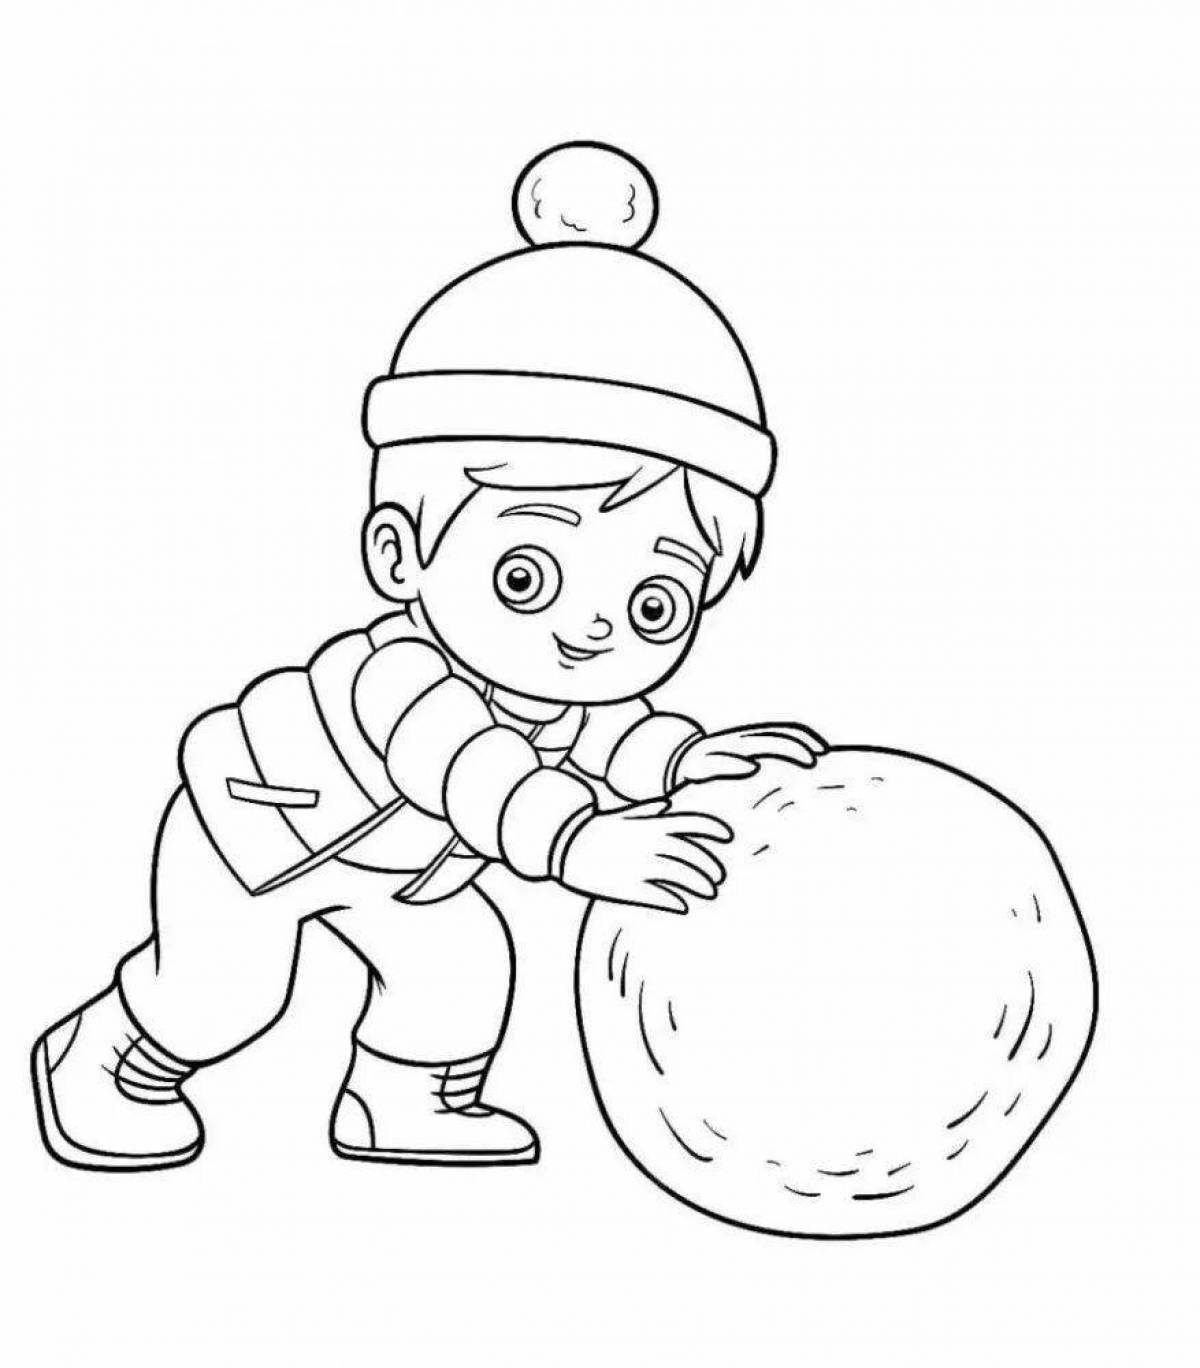 Animated snowman simulation coloring page